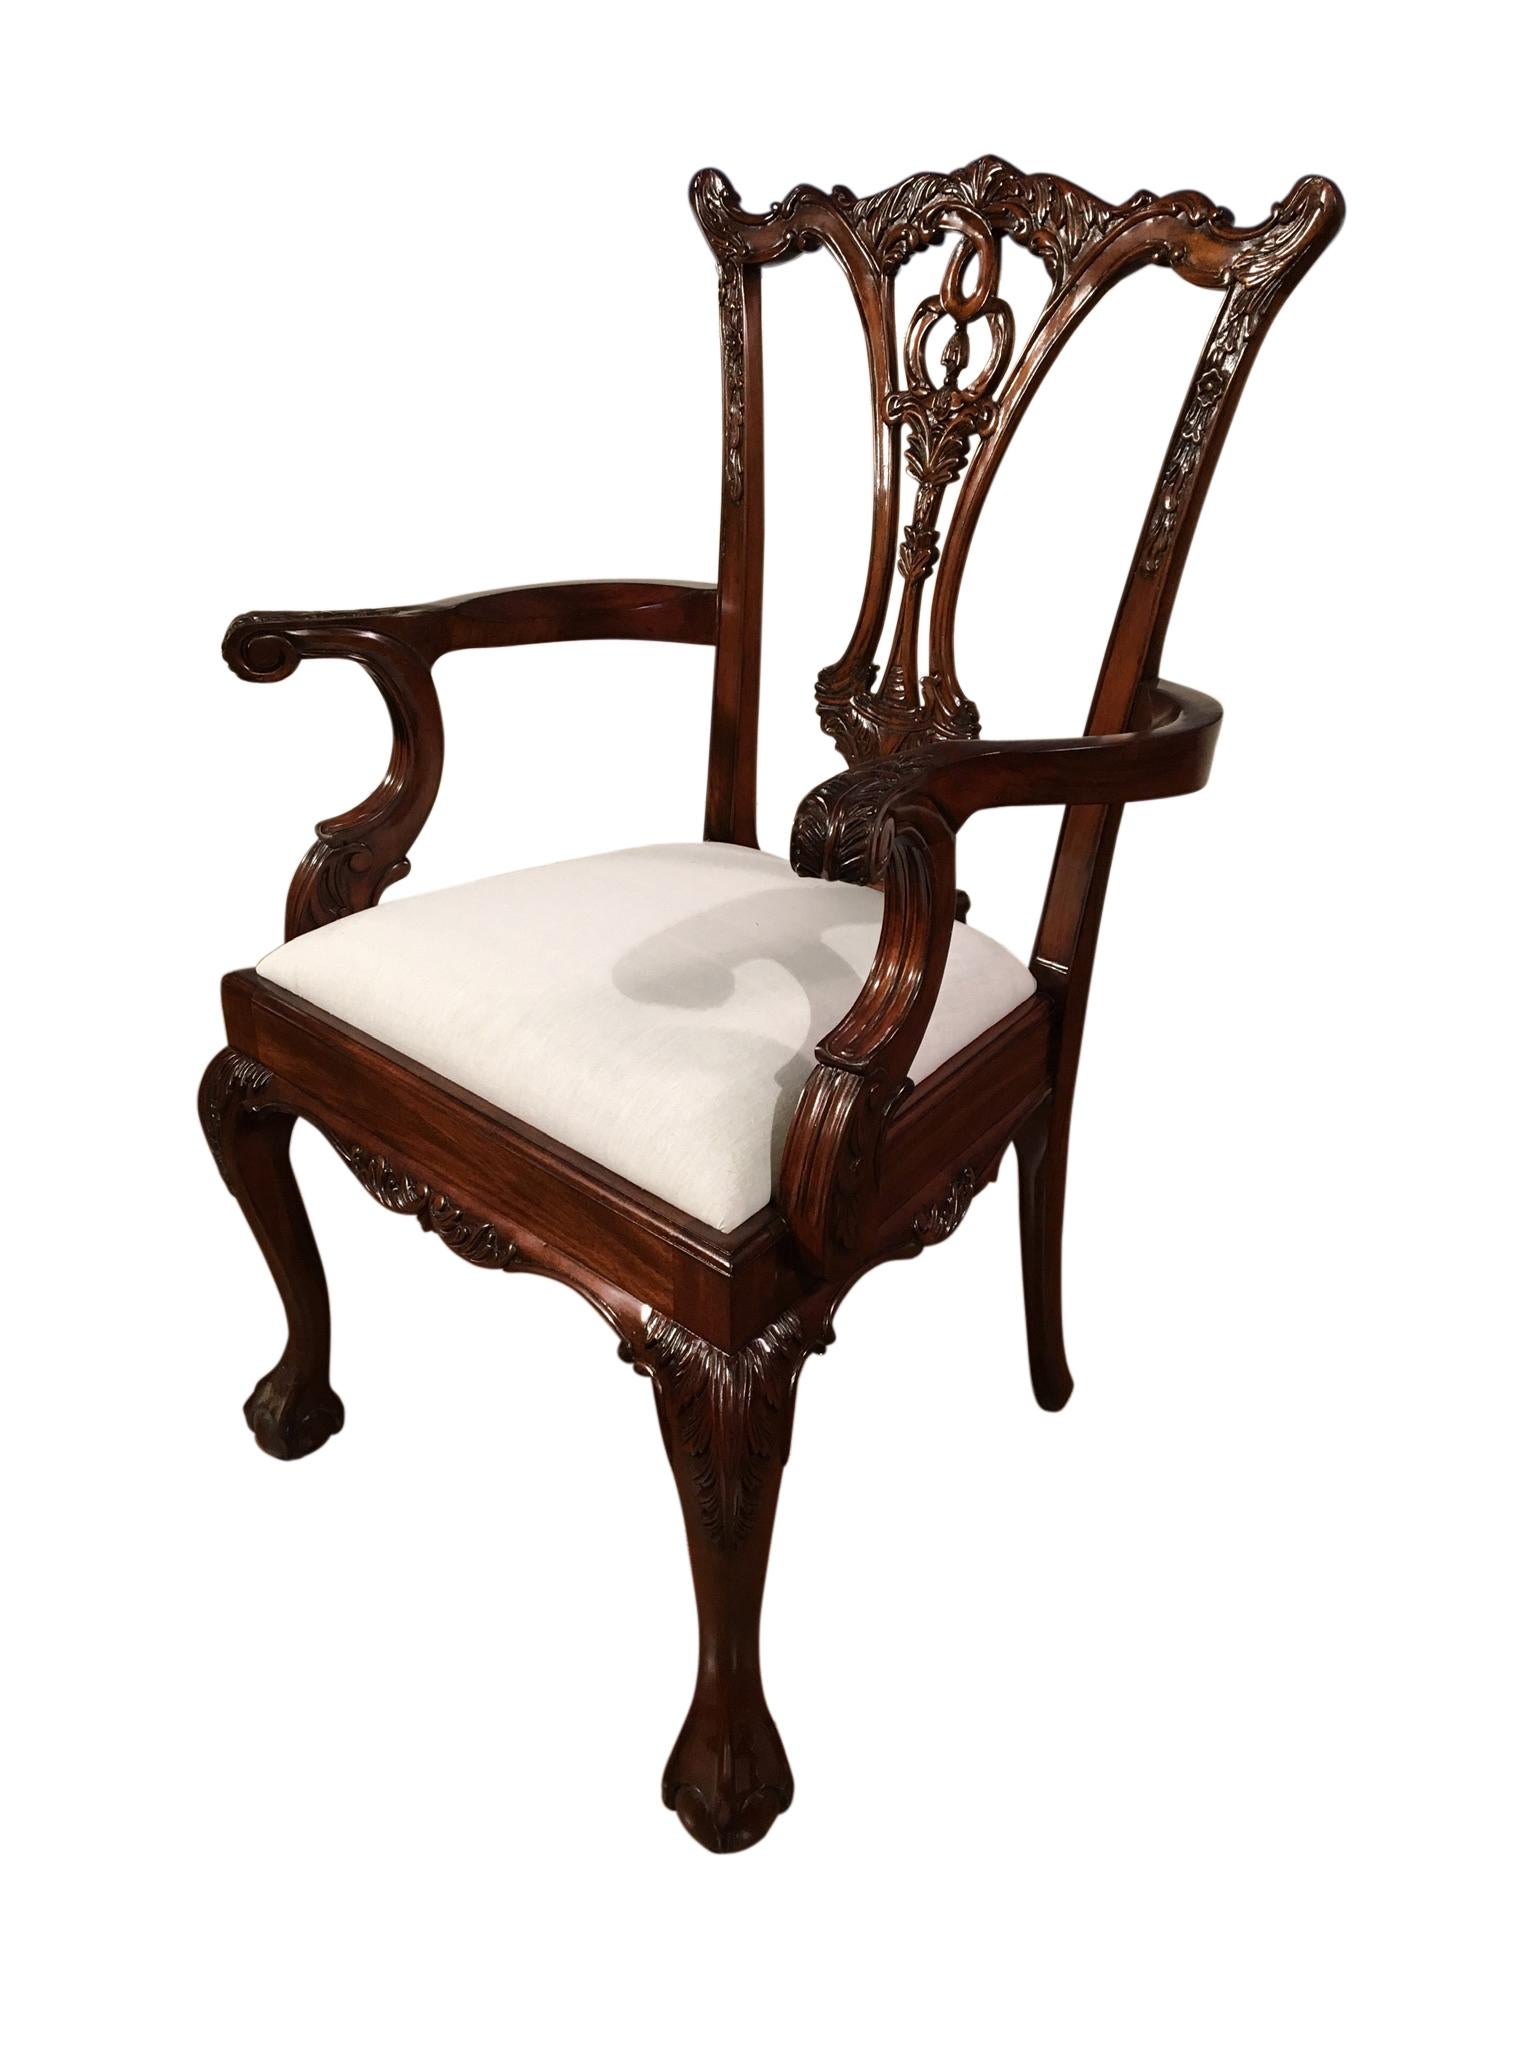 Eight New Mahogany Chippendale Ball and Claw Dining Chairs by Leighton Hall For Sale 1